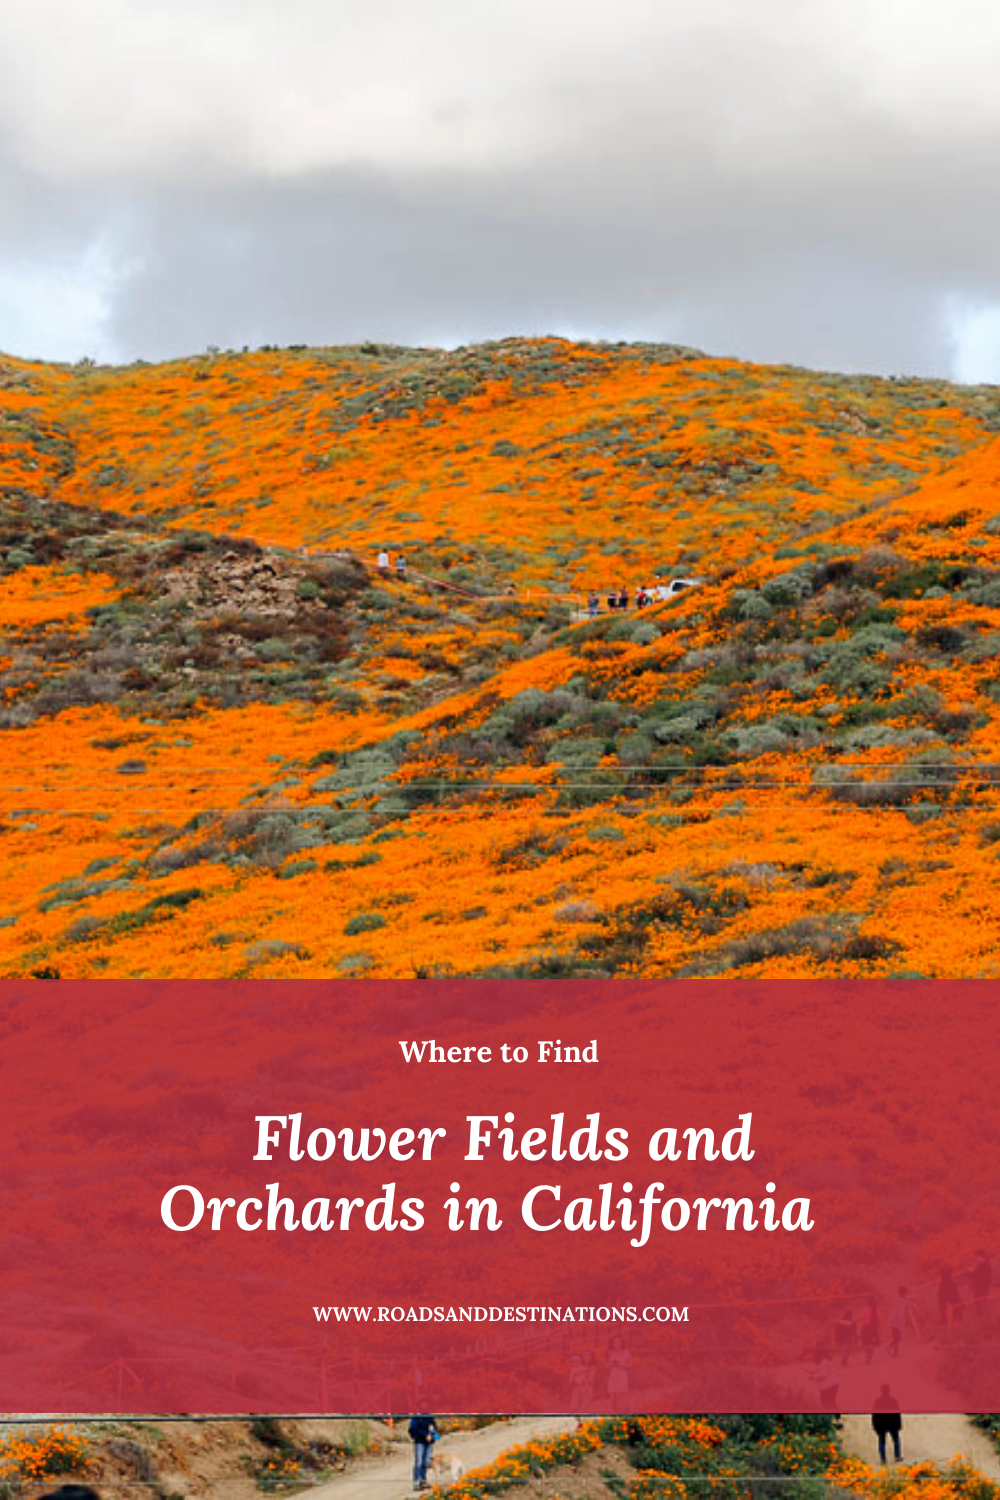 Flower Fields in California - Roads and Destinations